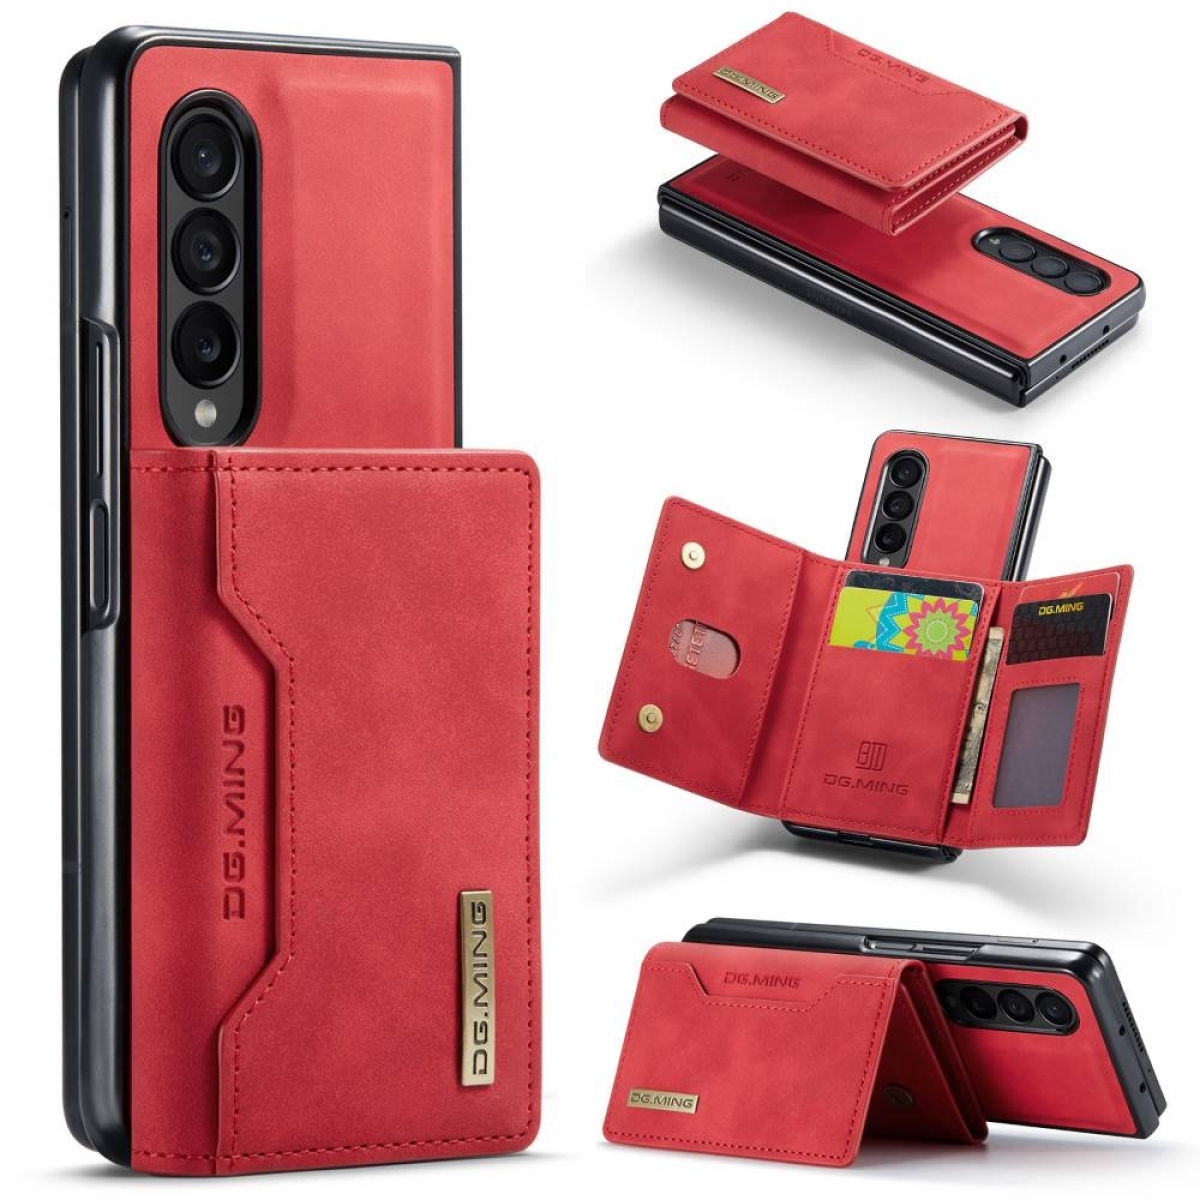 DG MING Samsung, Backcover, M2 4, 2in1, Fold Galaxy Z Rot